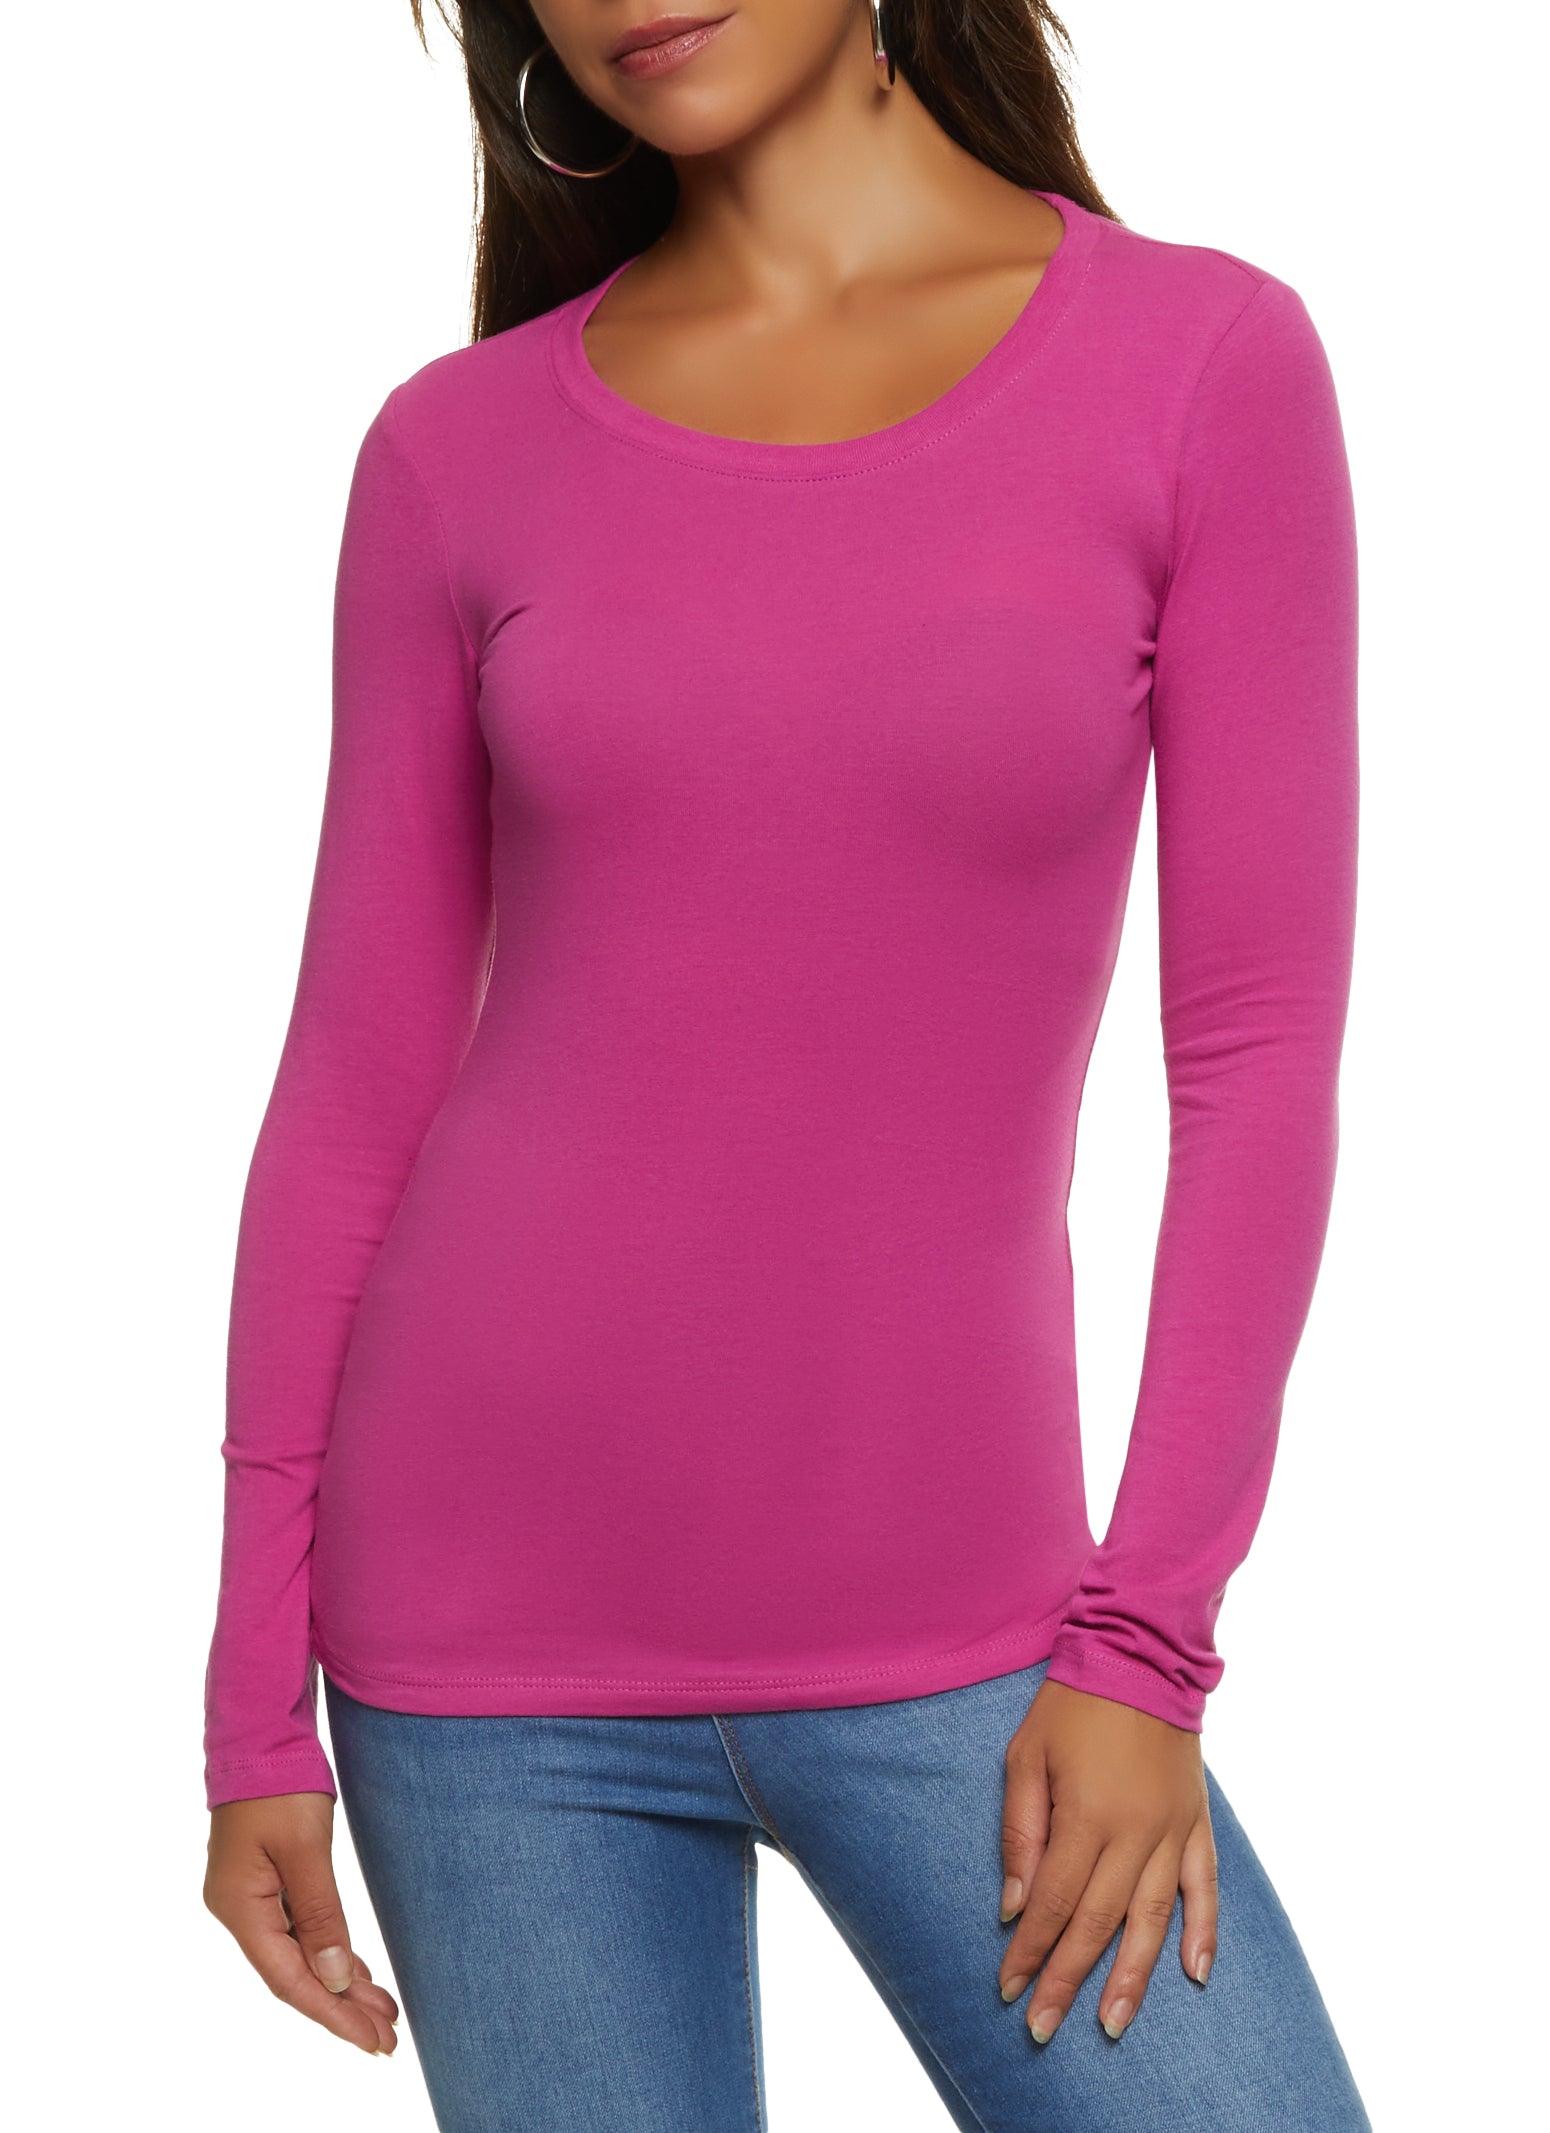 Women's Off Shoulder Top - Lace Border / Long Sleeves / Pink